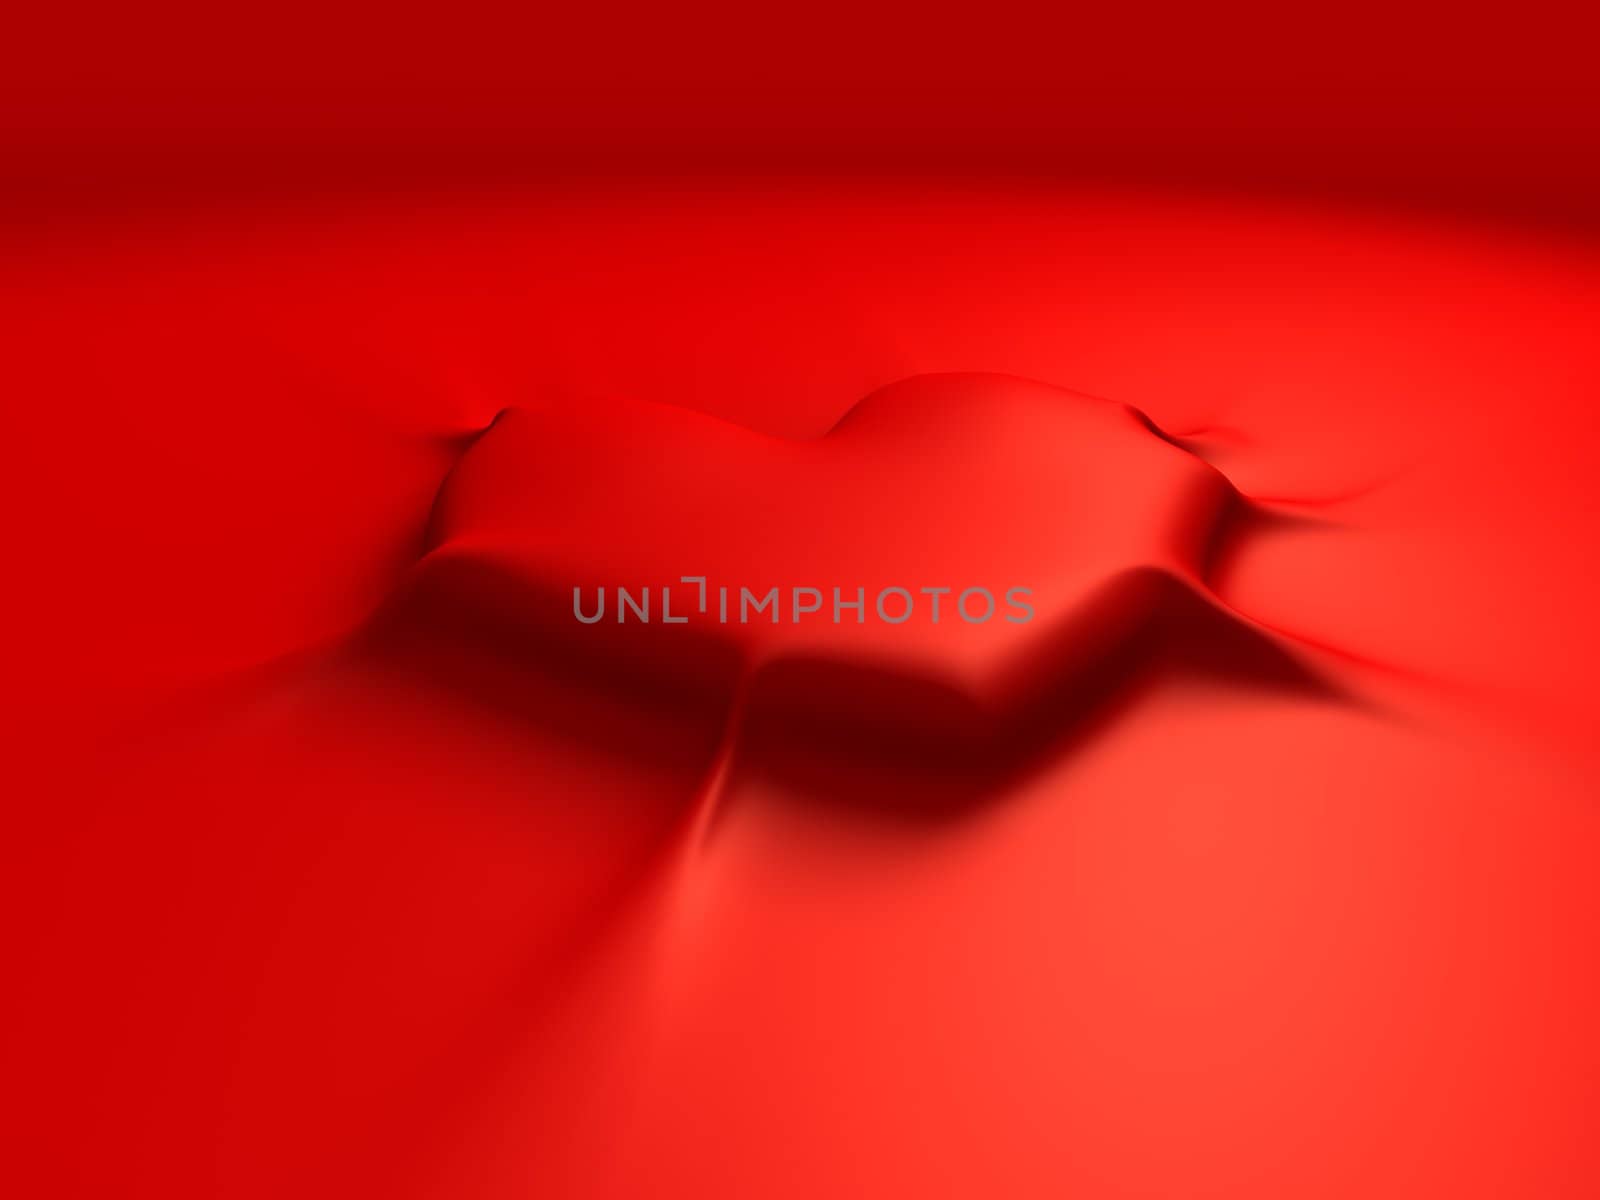 Rendered sticky red heart on red background